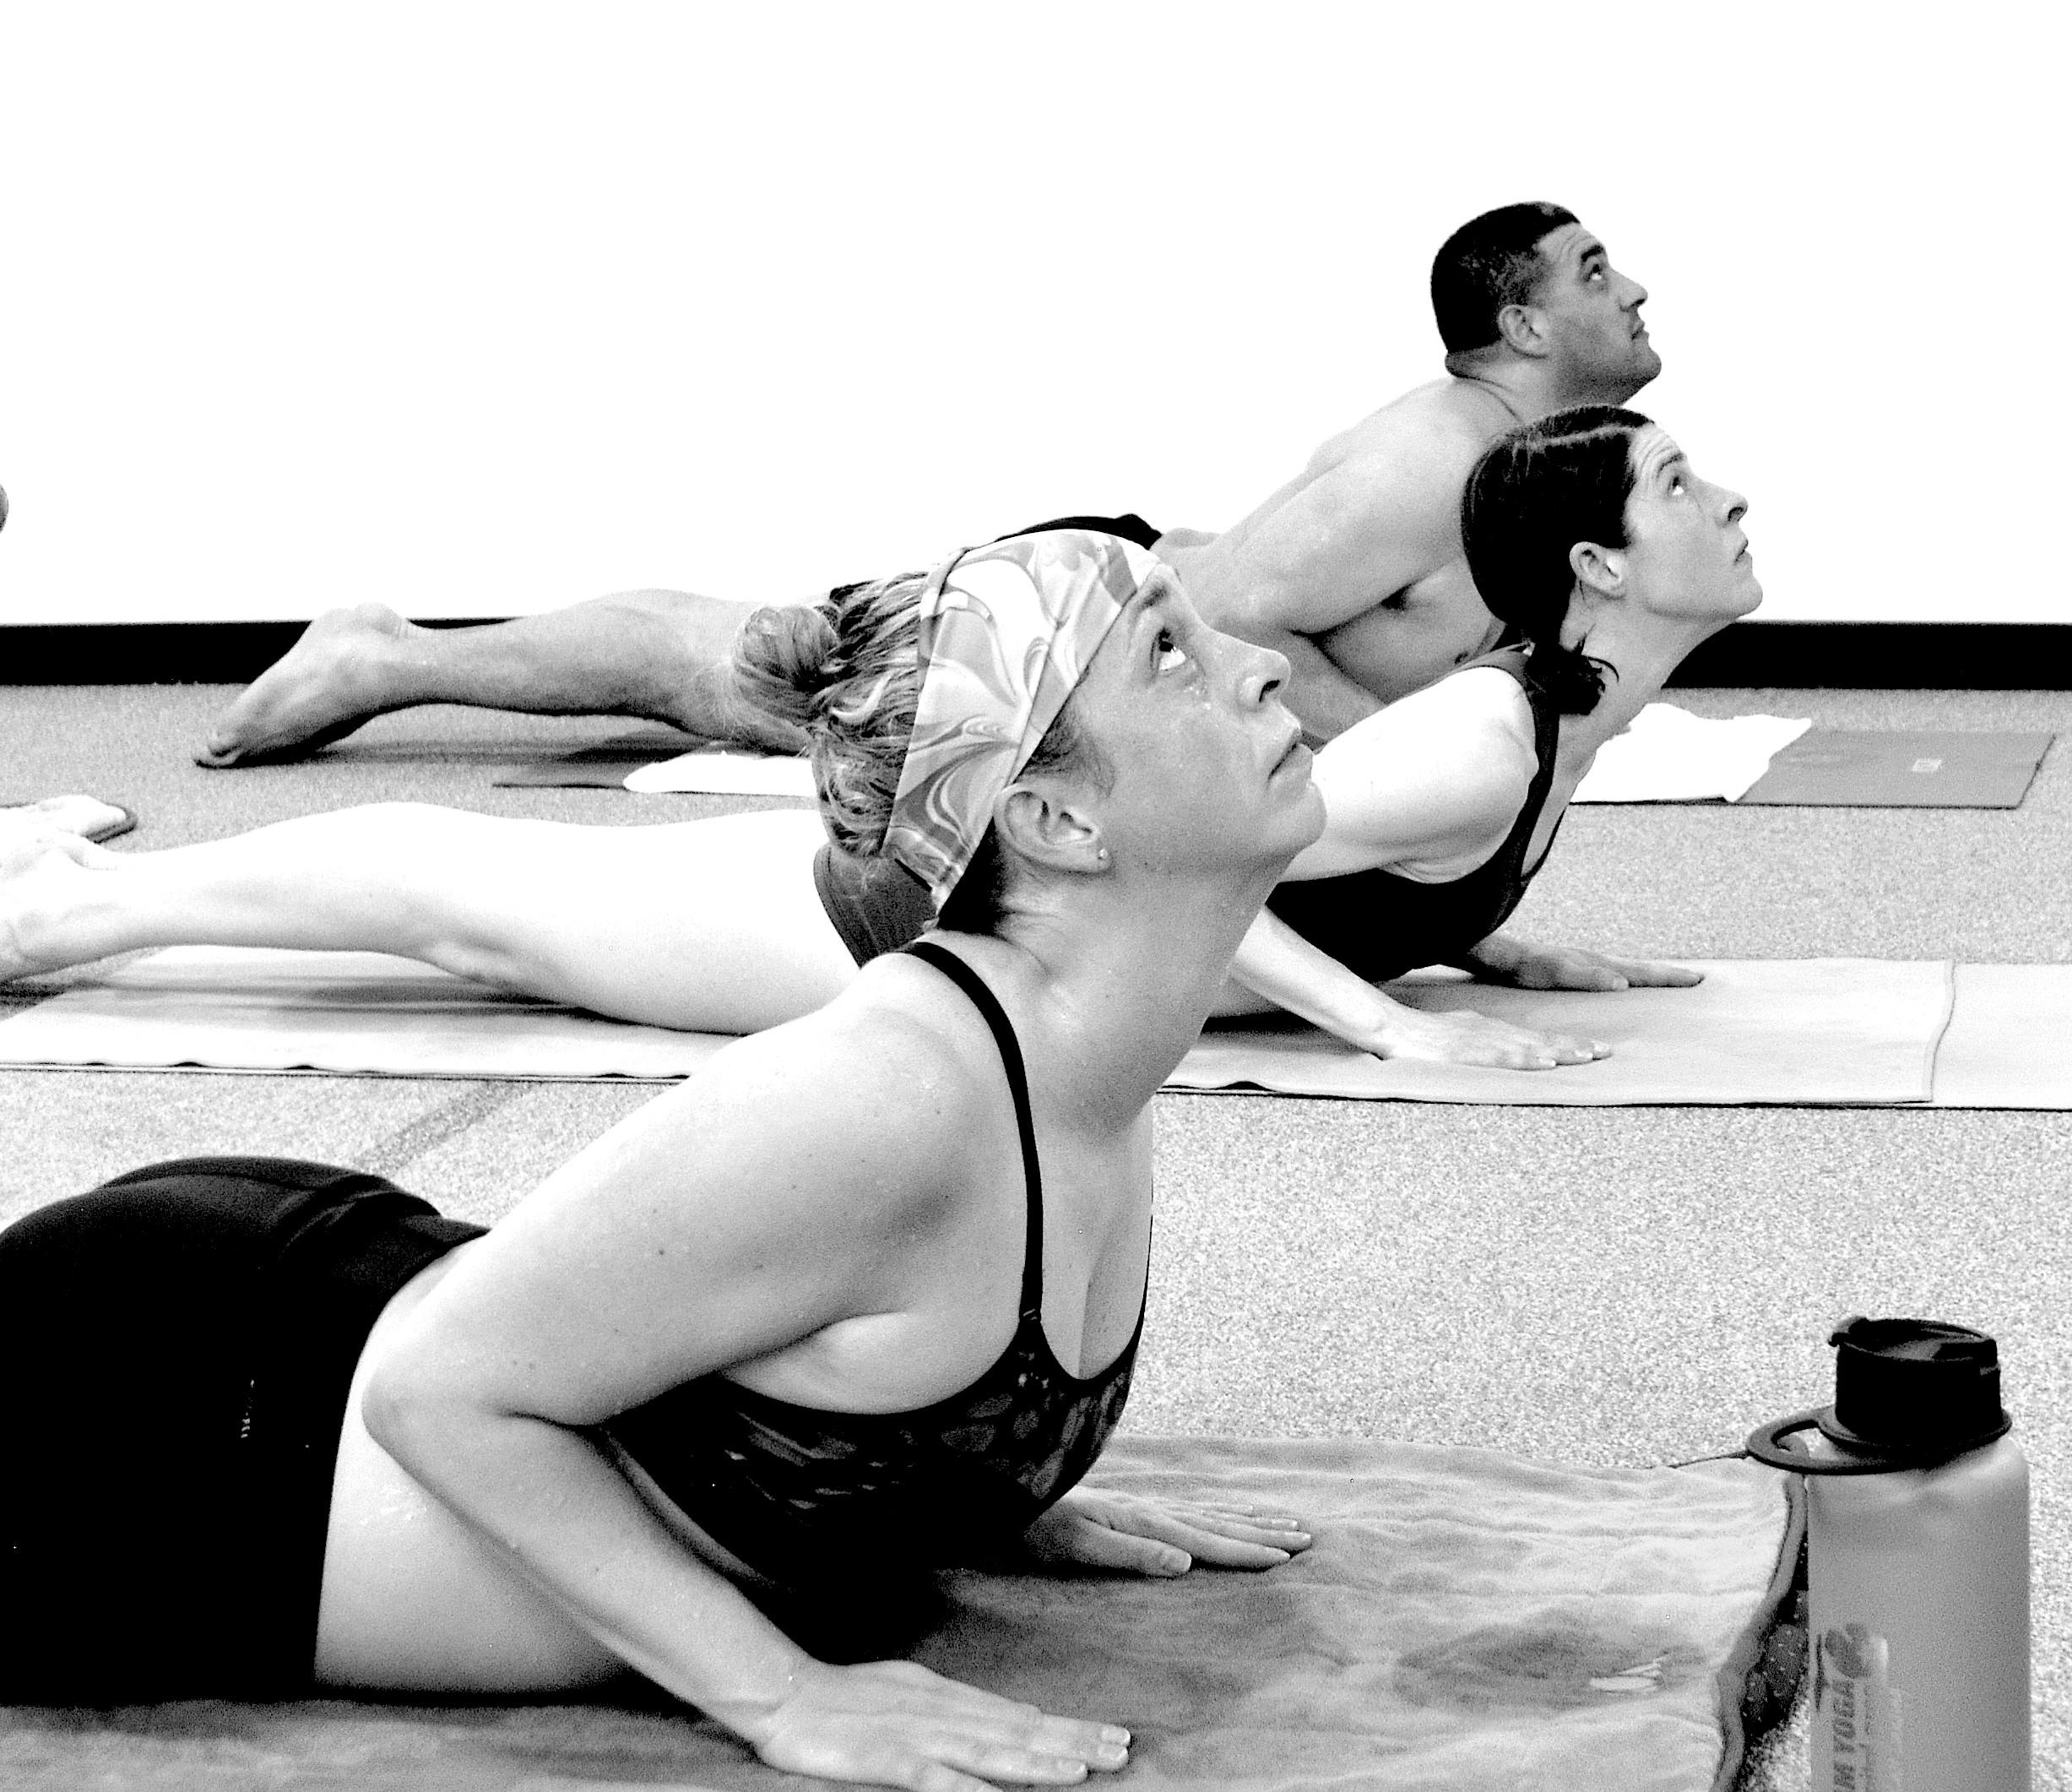 Bikram Yoga Five Dock - 🔺The Triangle is the only posture in the world  that improves every muscle, joint, tendon, and internal organ in the body.  At the same time, it revitalizes